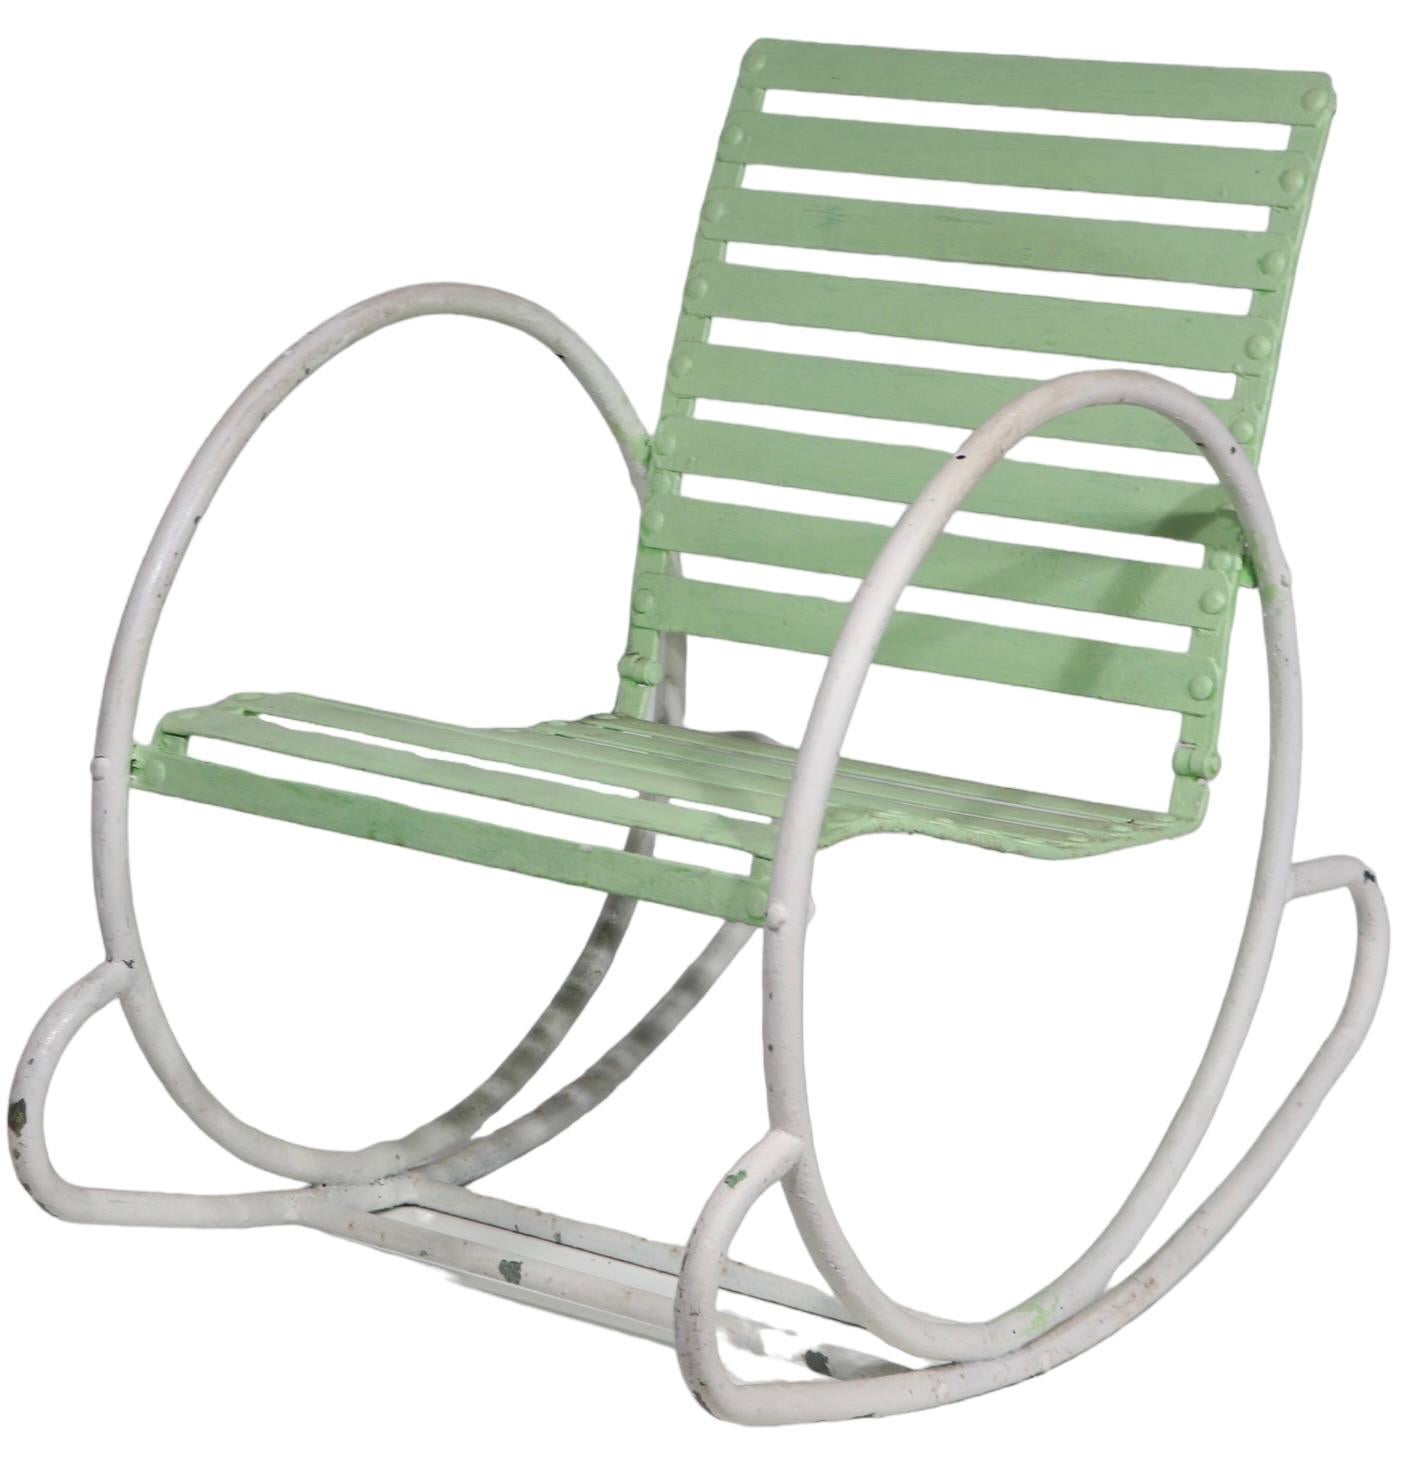 Art Deco Iron and Steel Garden Patio Poolside  Hoop Frame Rocking Chair c 1930's In Good Condition For Sale In New York, NY